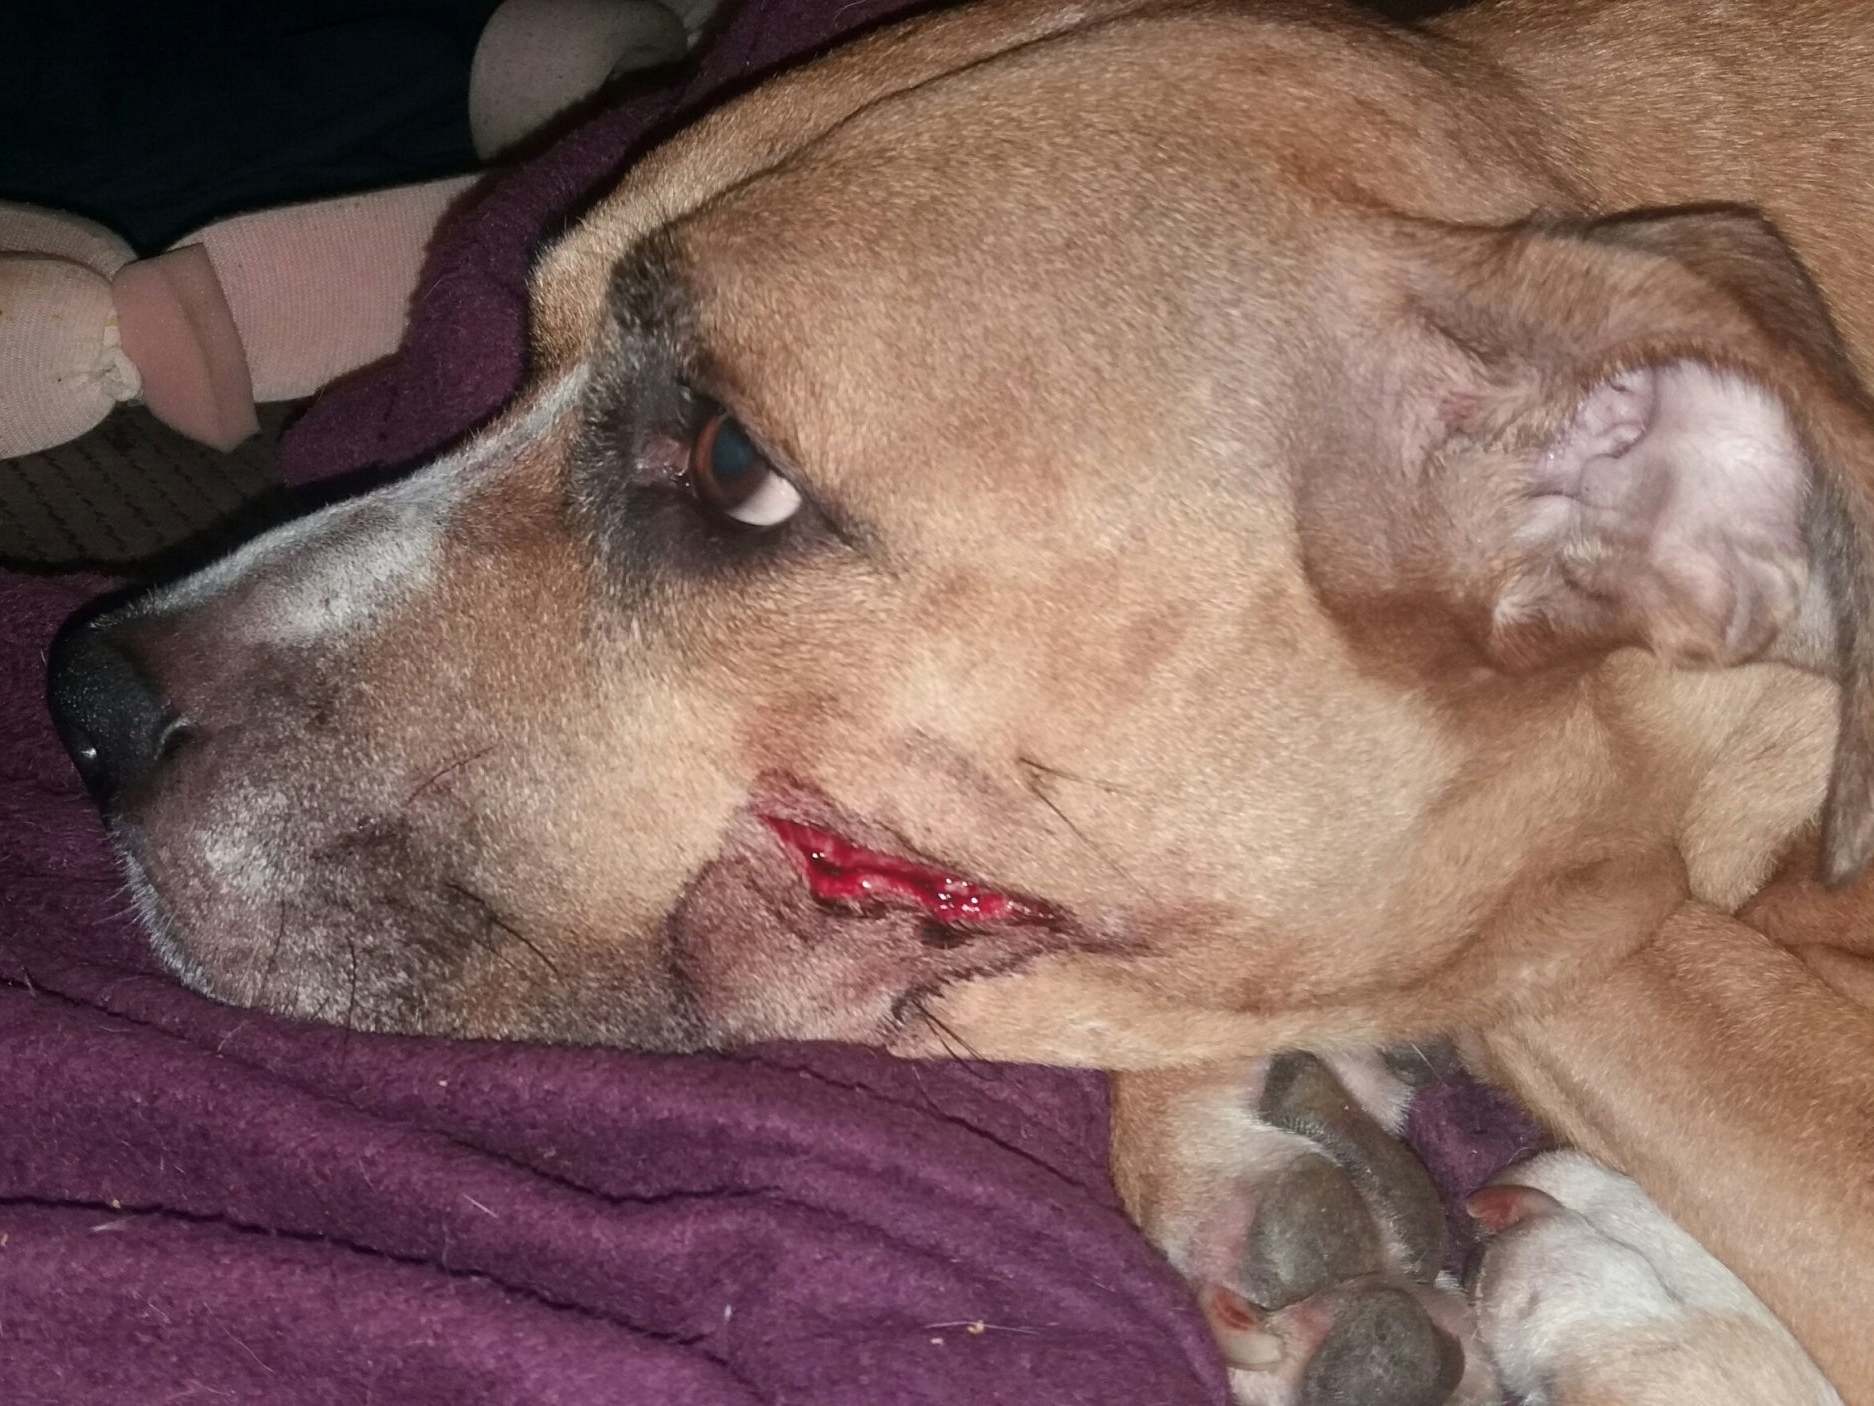 Zena was injured with a machete during the robbery at a flat in Manchester